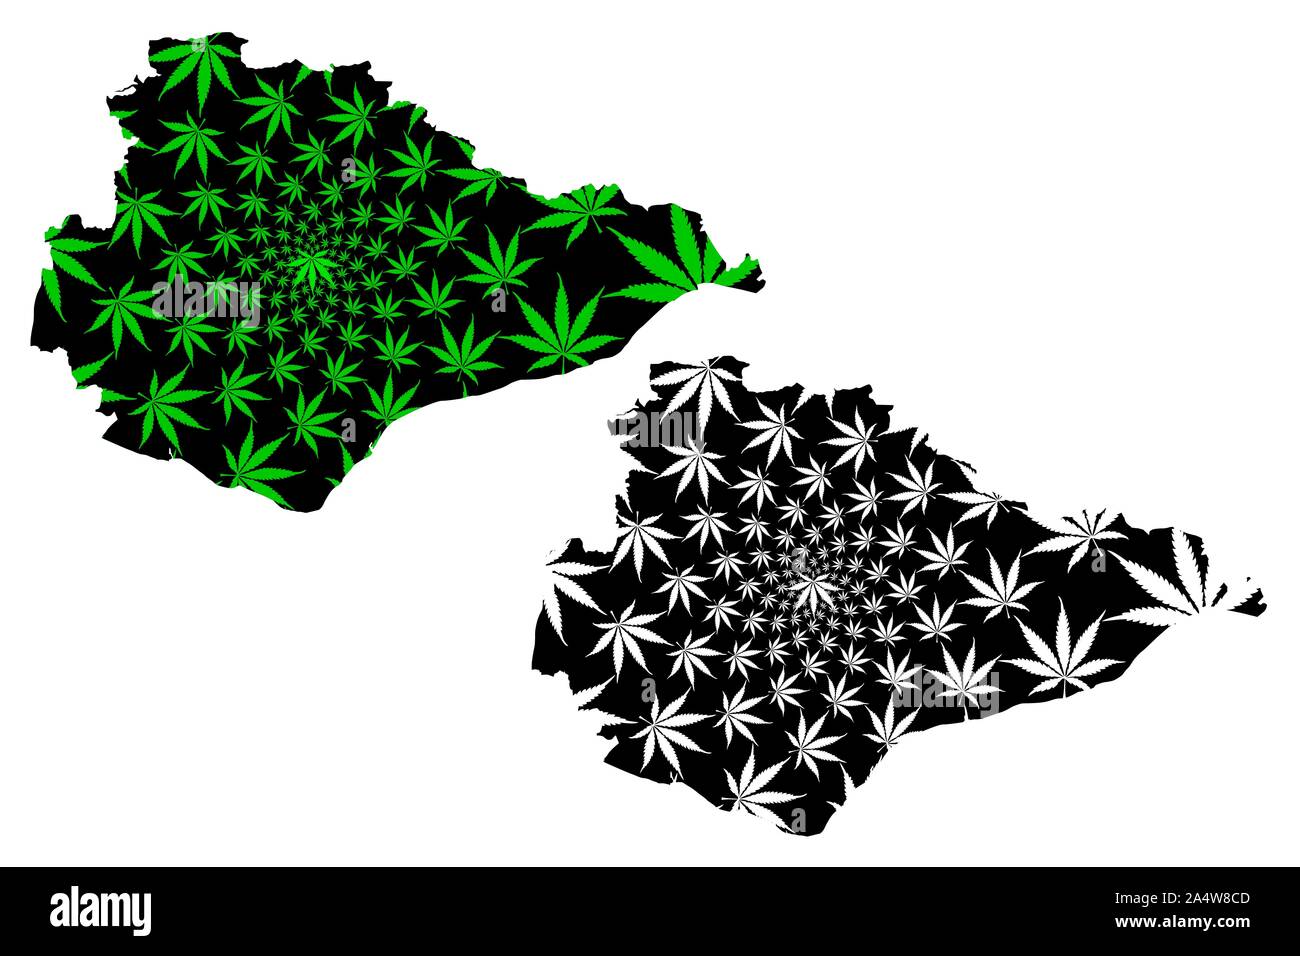 East Sussex (United Kingdom, England, Non-metropolitan county, shire county) map is designed cannabis leaf green and black, East Sussex map made of ma Stock Vector